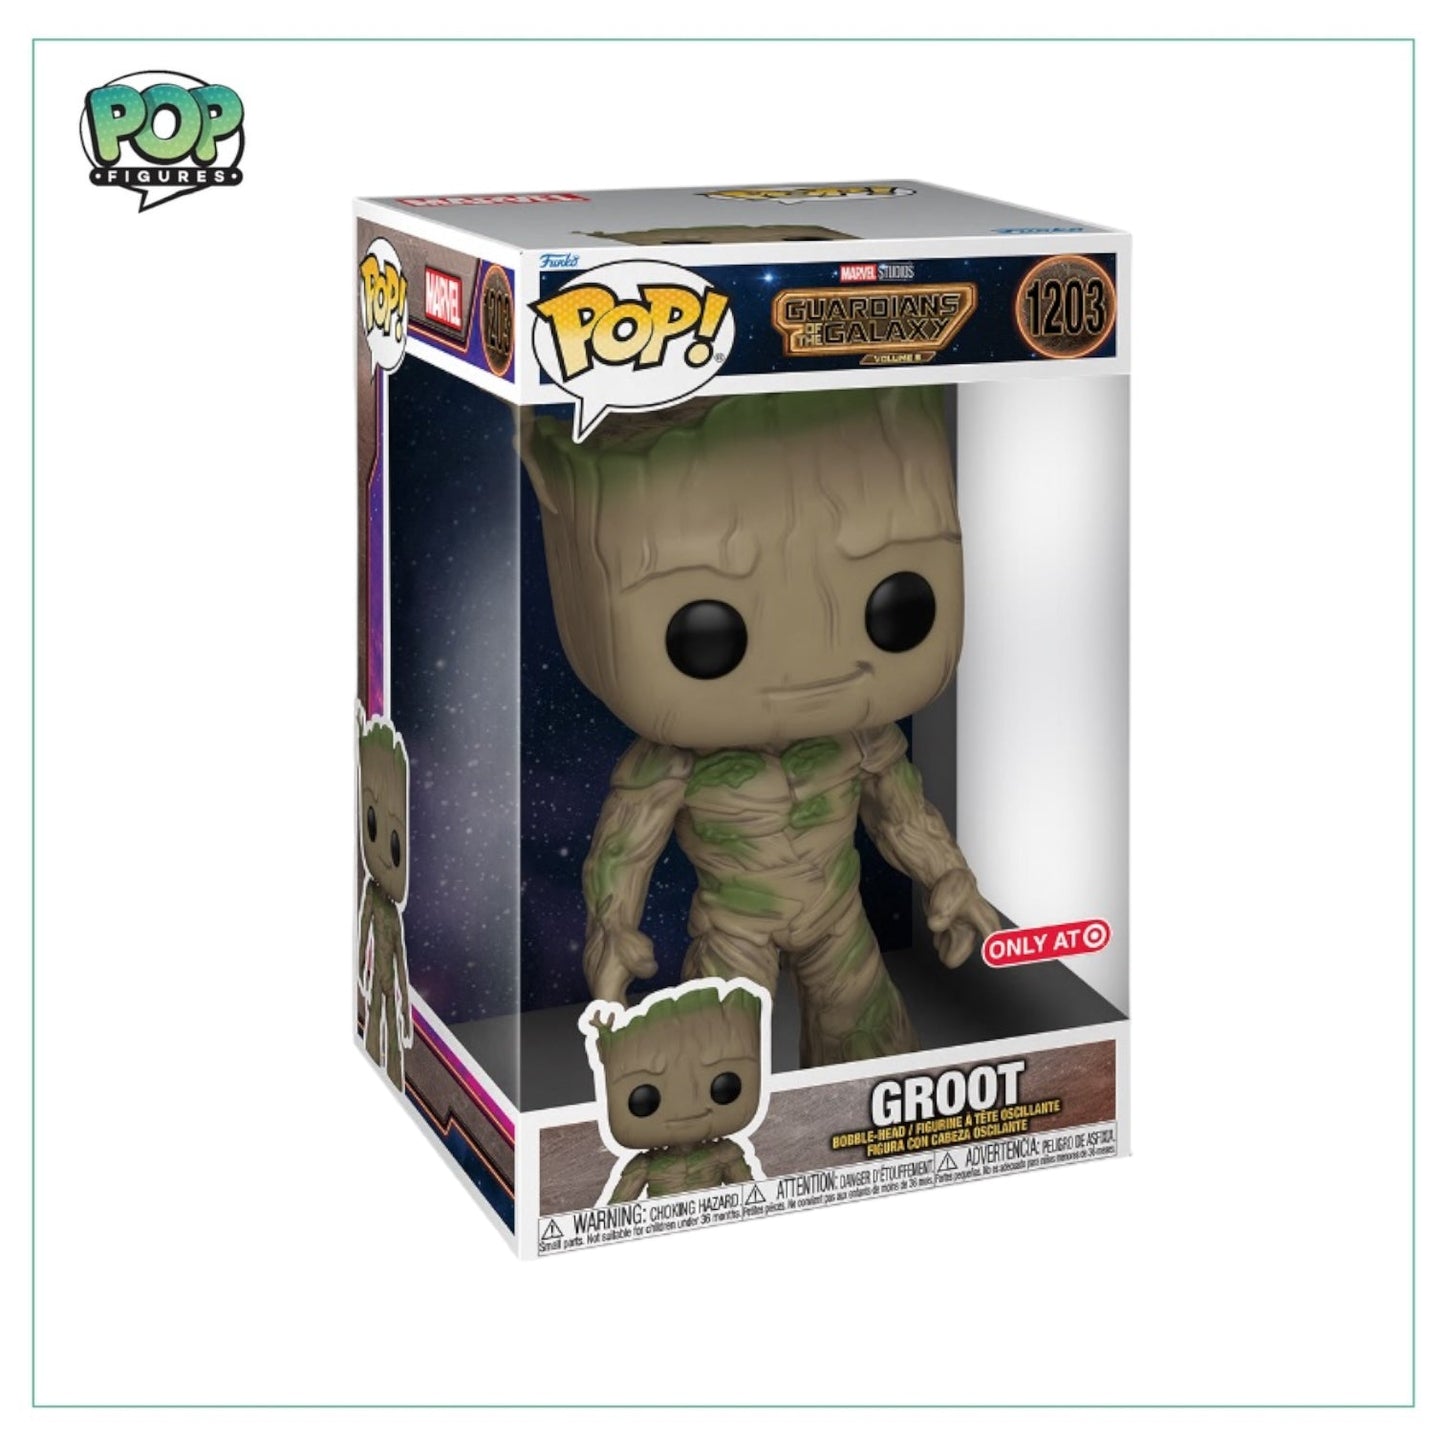 Groot #1203 10" Funko Pop! - Guardians of the Galaxy Vol 3 - Target Exclusive - Angry Cat